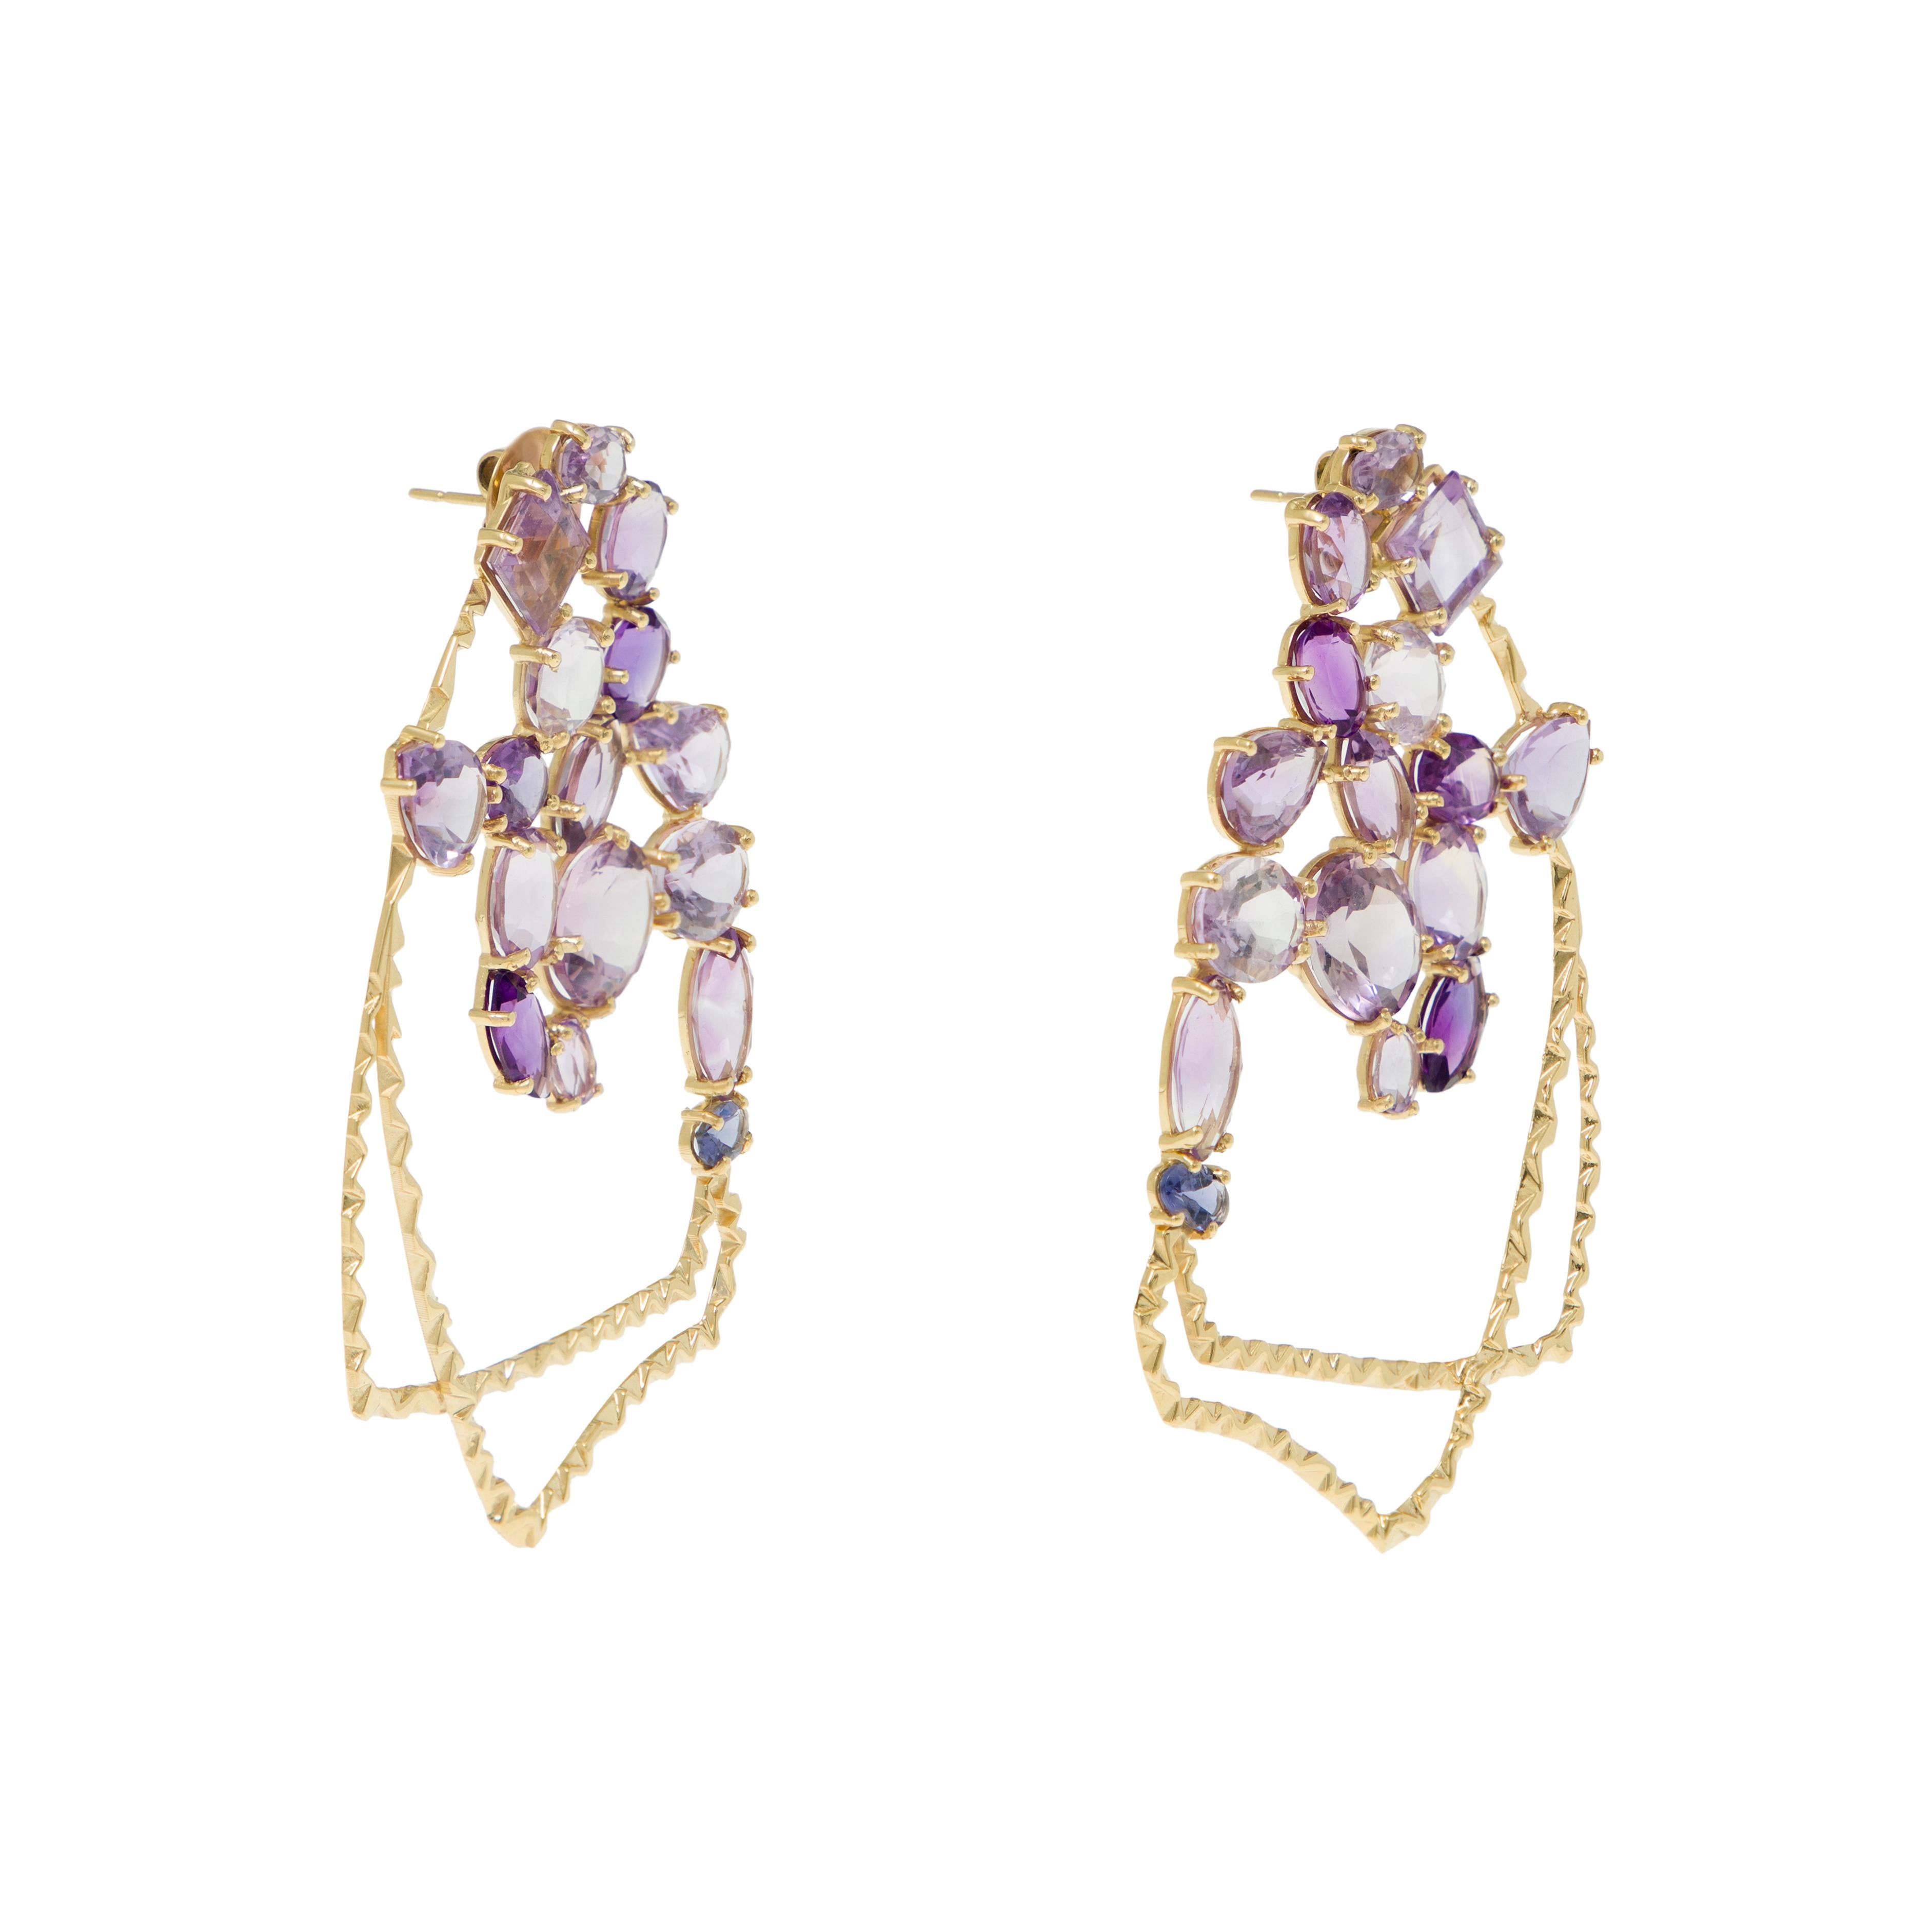 Earrings
Gold 18K
Iolites, Dark, Medium and Light Amethysts
Handmade, bright polished finish, light carved prong setting

A' Design Award (2020-2021) special mention

Amethysts and iolites were used to emulate Van Gogh’s purple carnations in their